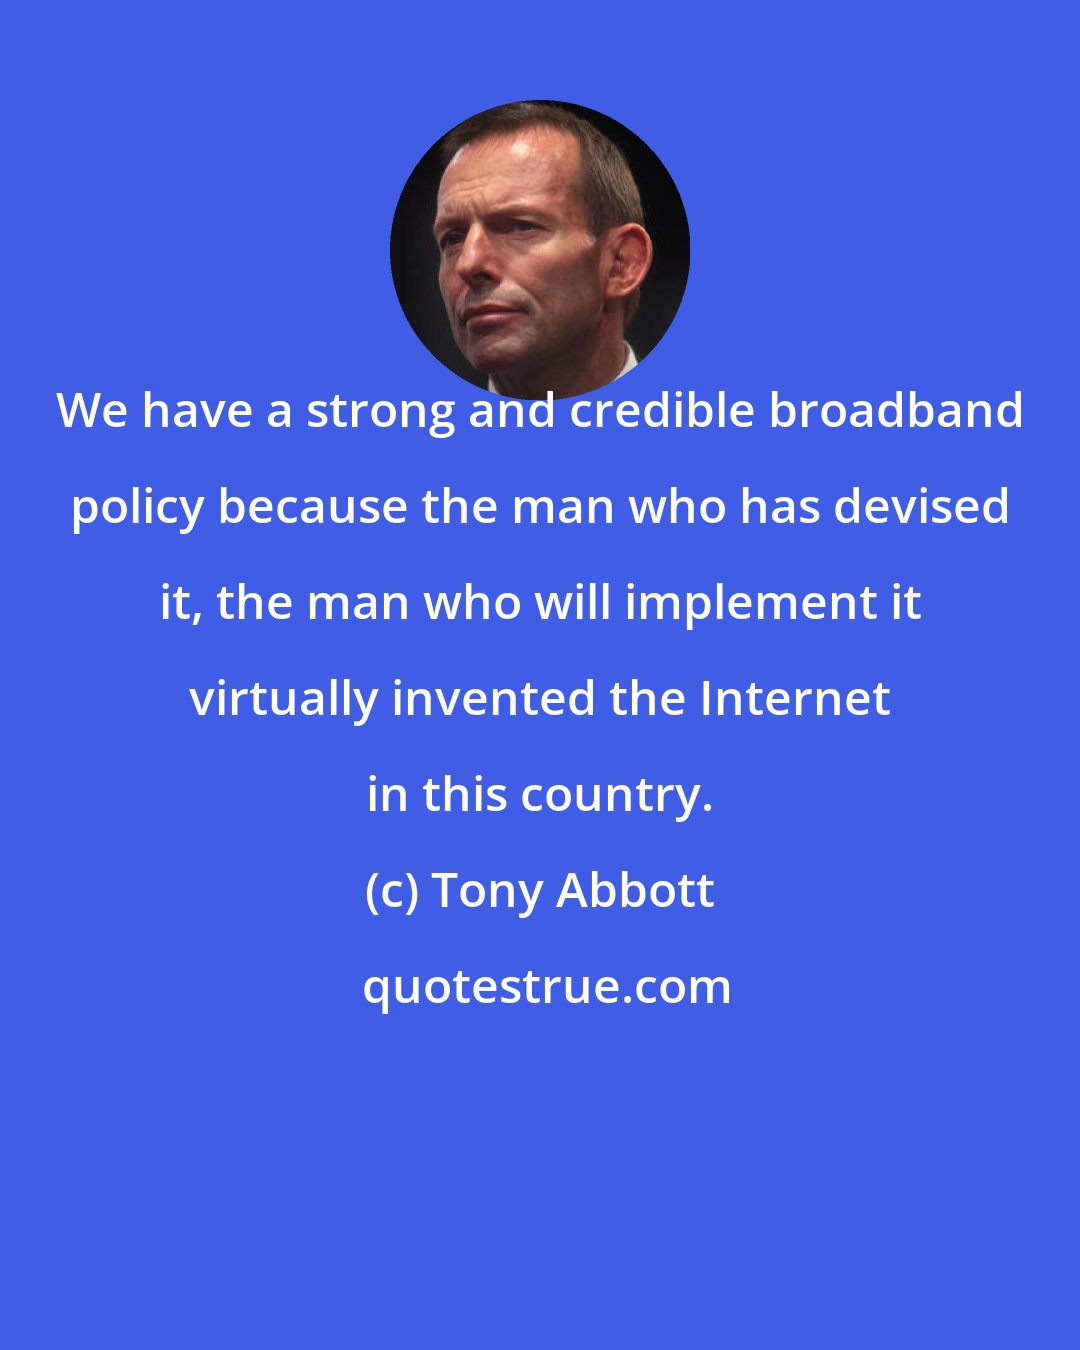 Tony Abbott: We have a strong and credible broadband policy because the man who has devised it, the man who will implement it virtually invented the Internet in this country.